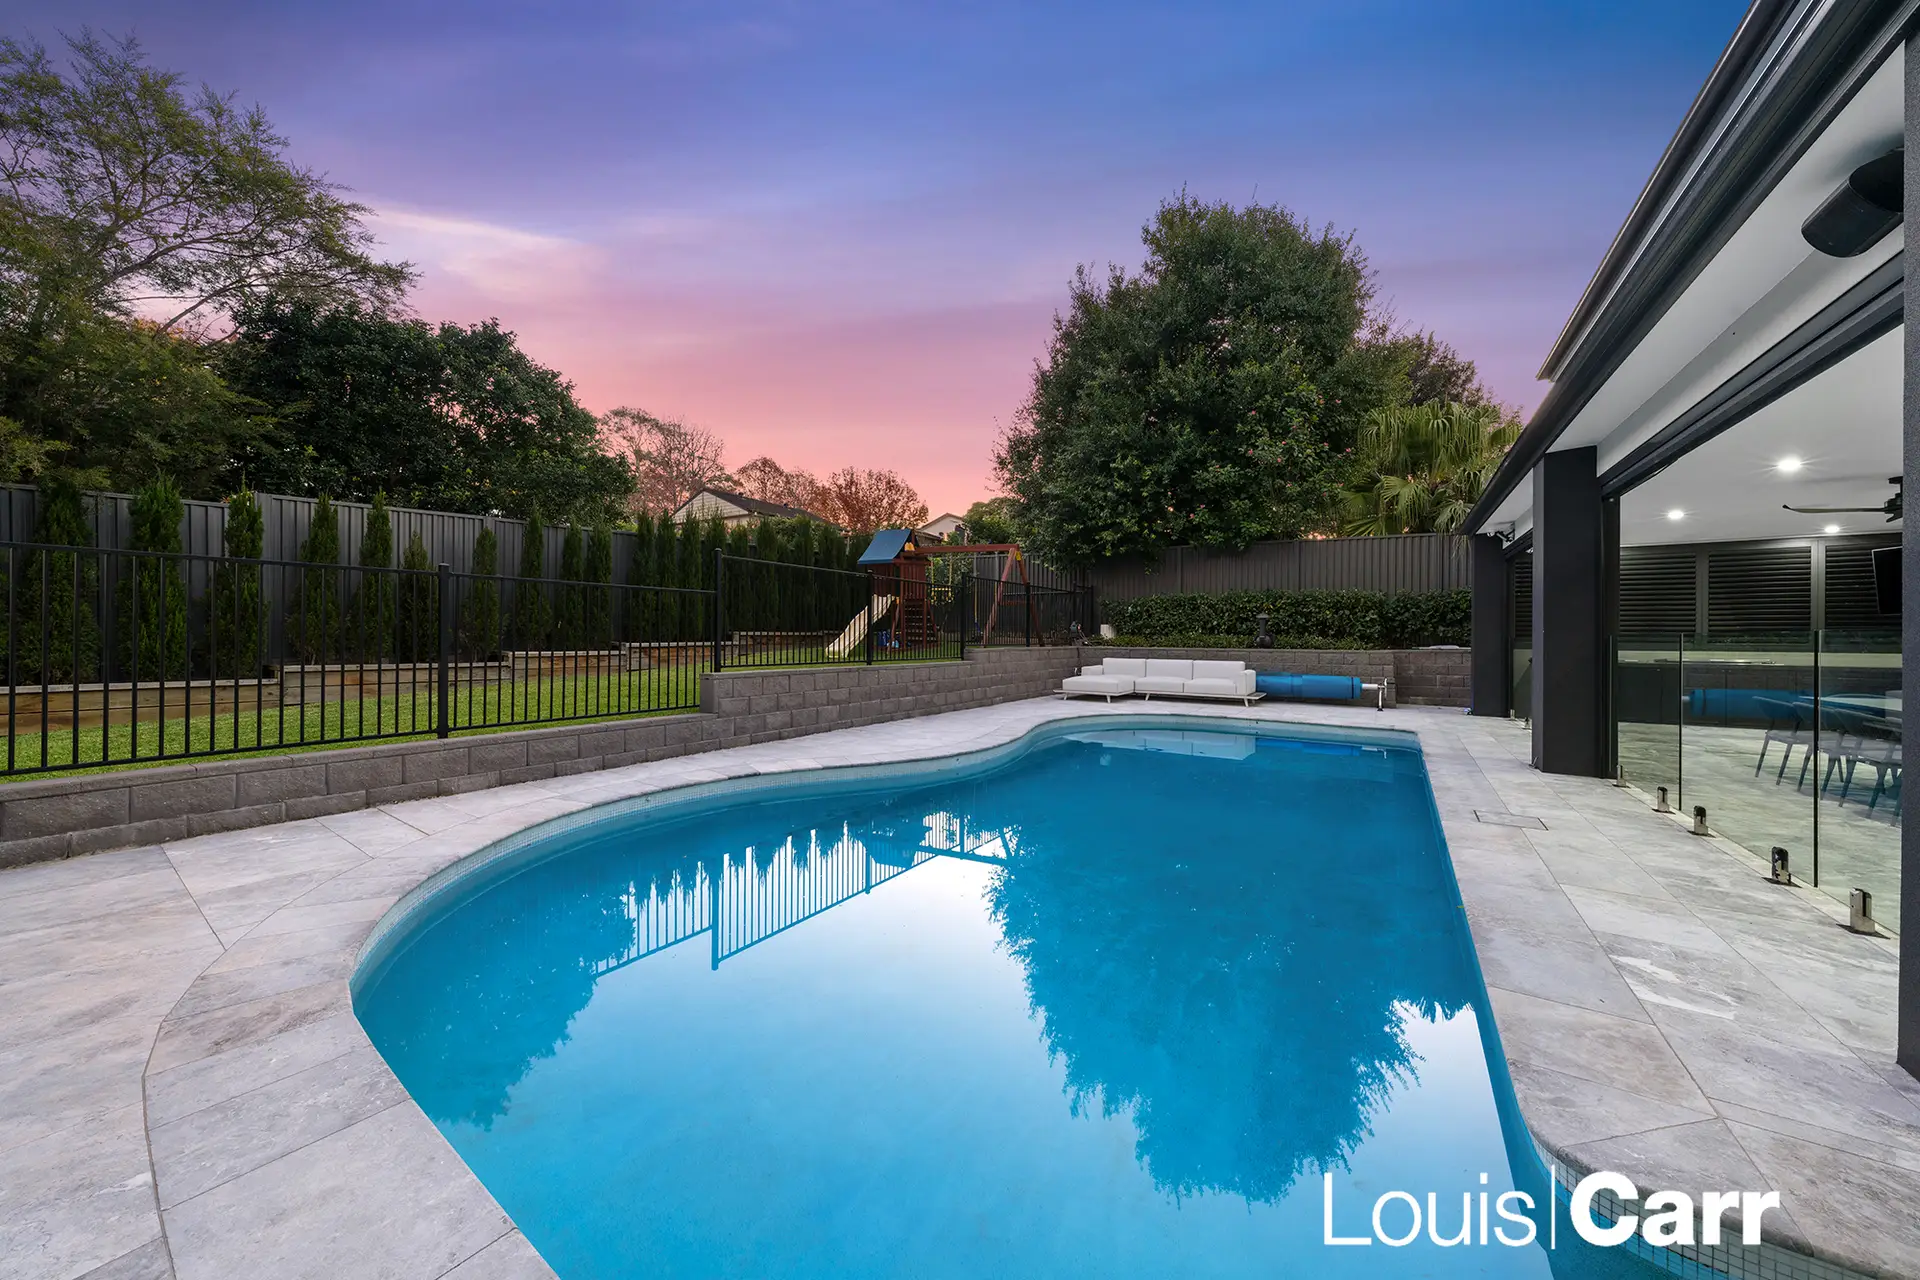 Photo #6: 61 Cambewarra Avenue, Castle Hill - Sold by Louis Carr Real Estate